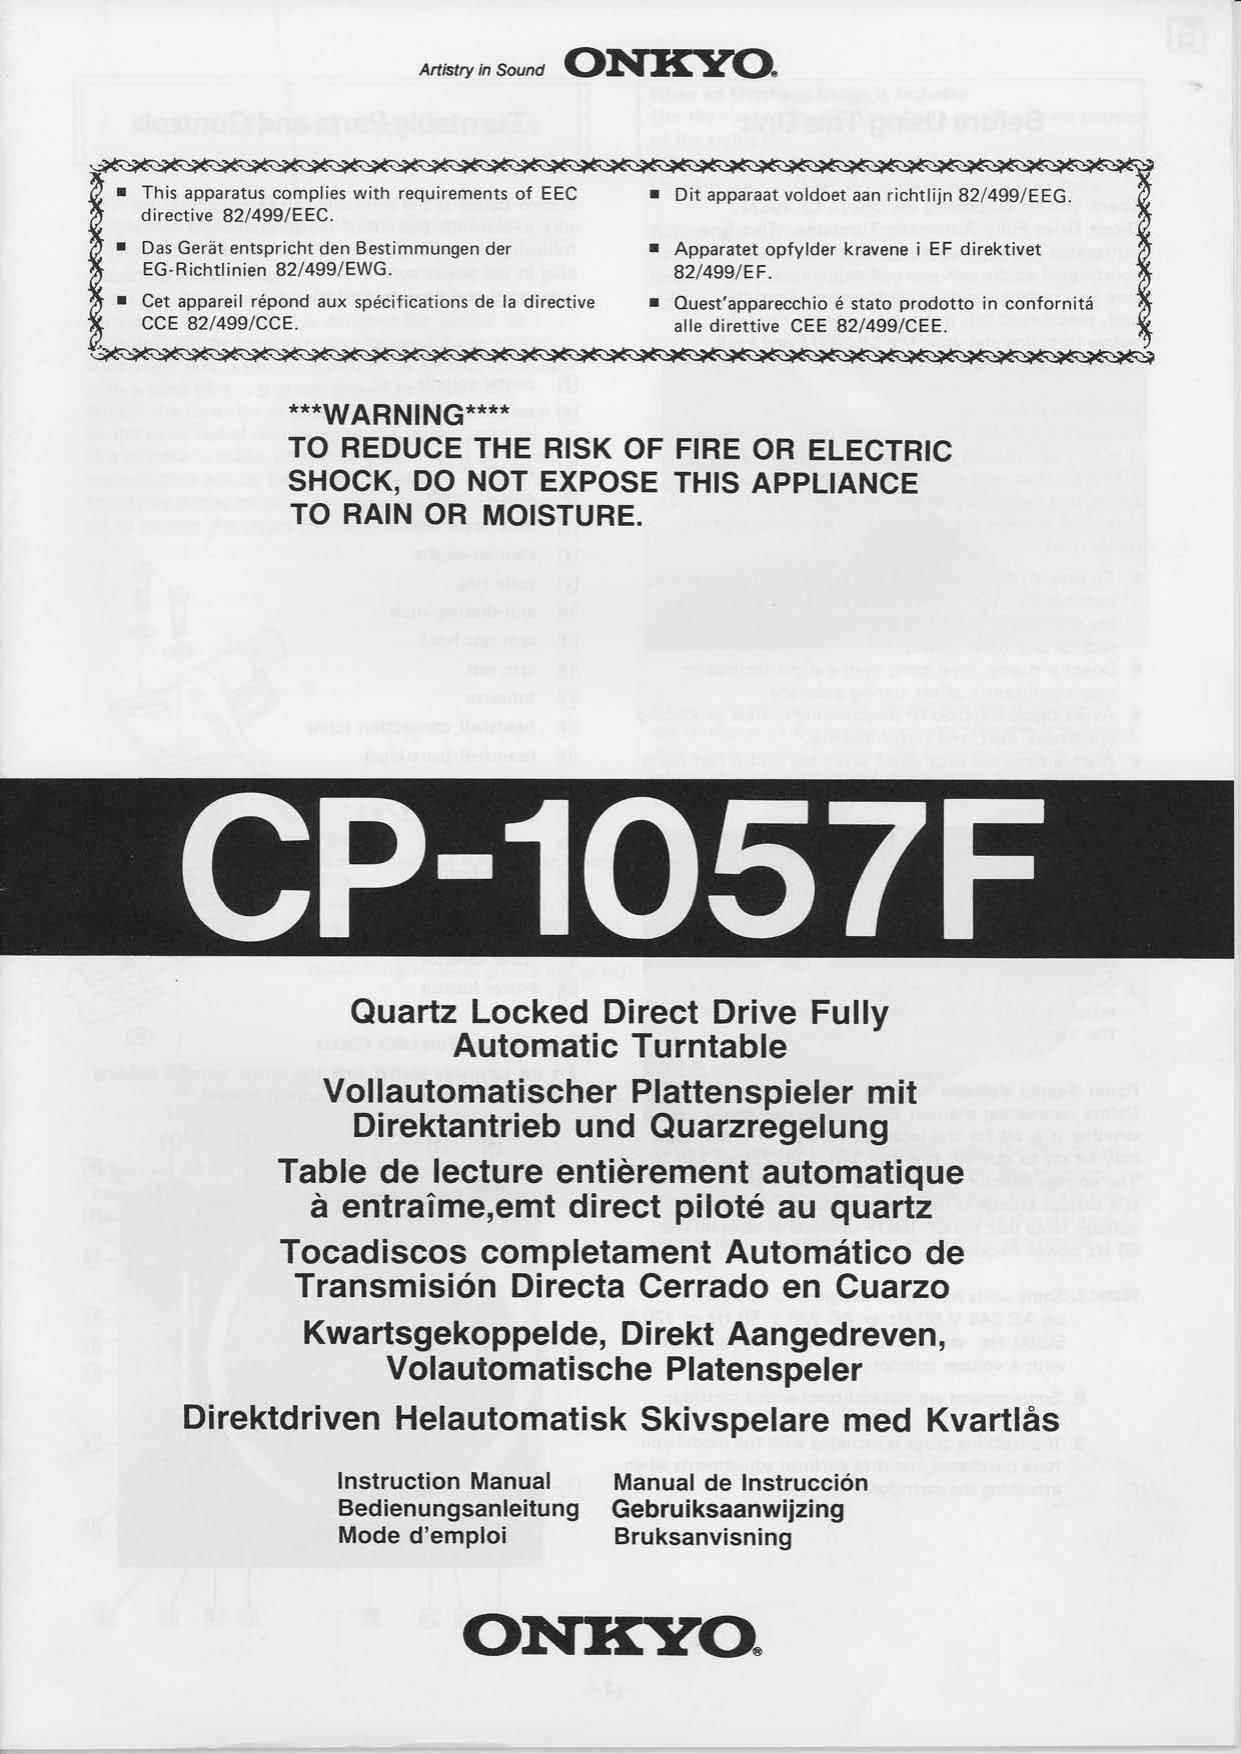 Onkyo CP 1057 F Owners Manual